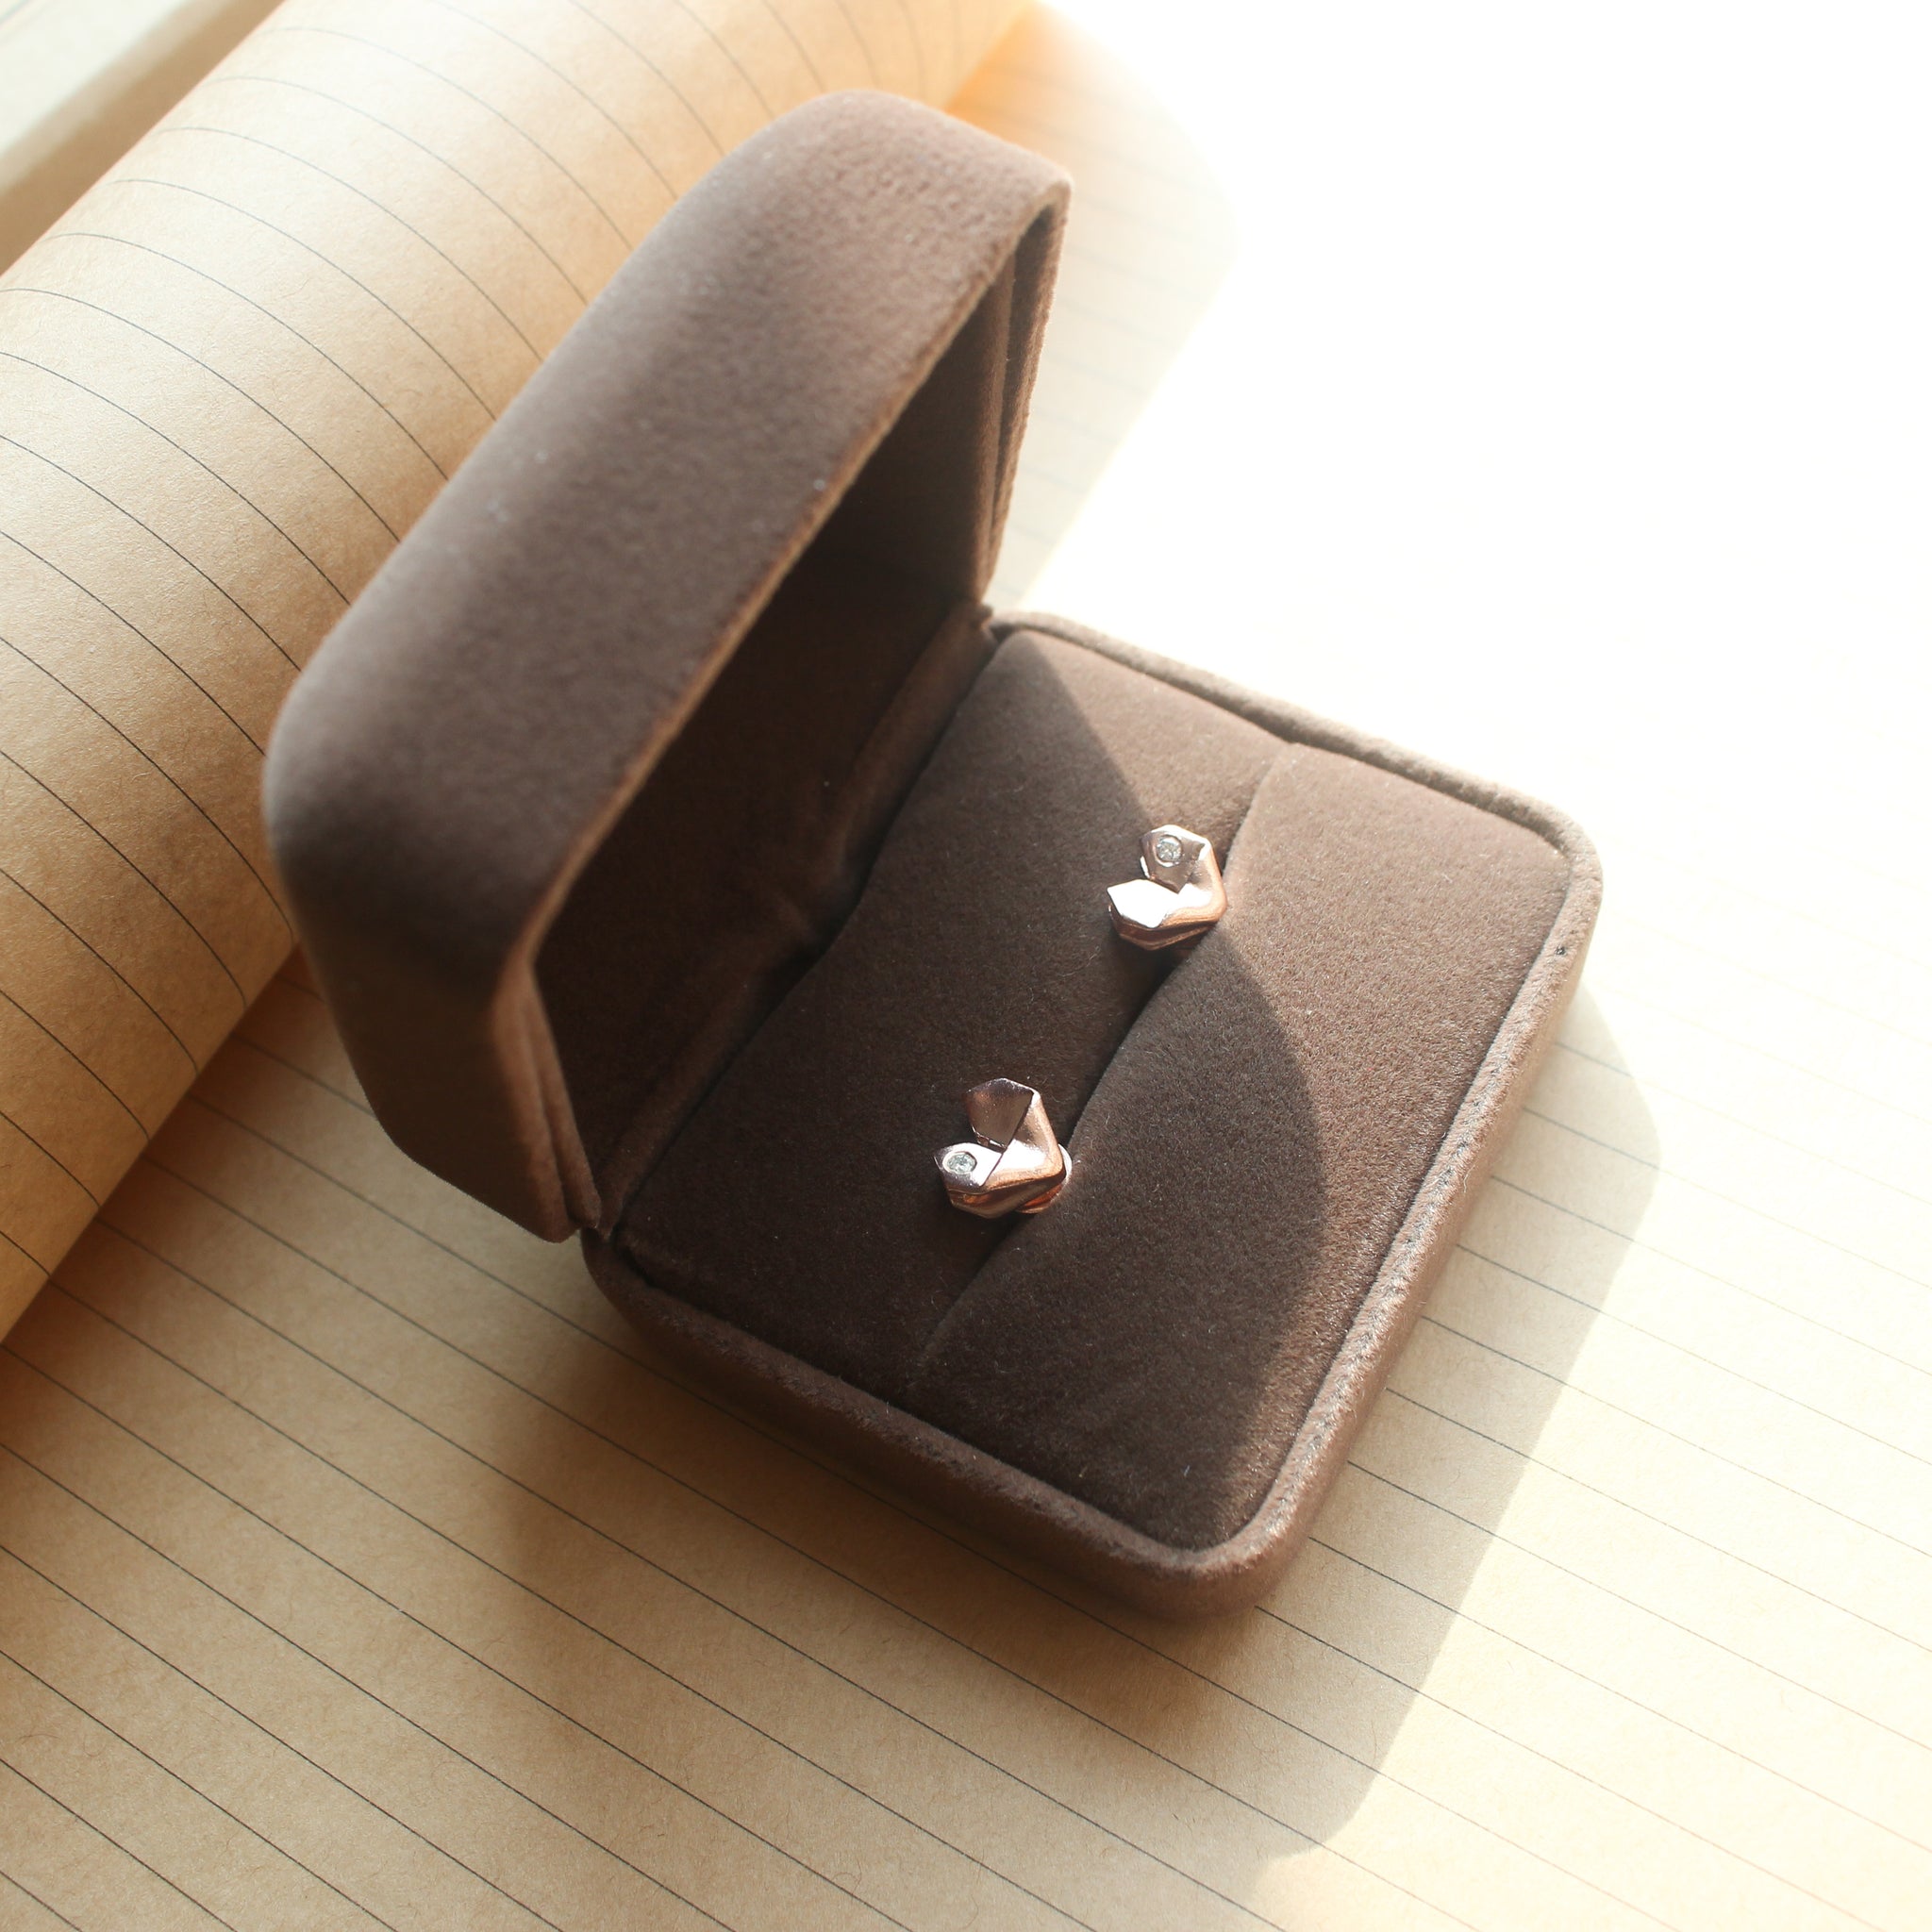 Rose Gold Plated 925 Silver Origami Heart Diamond Earrings